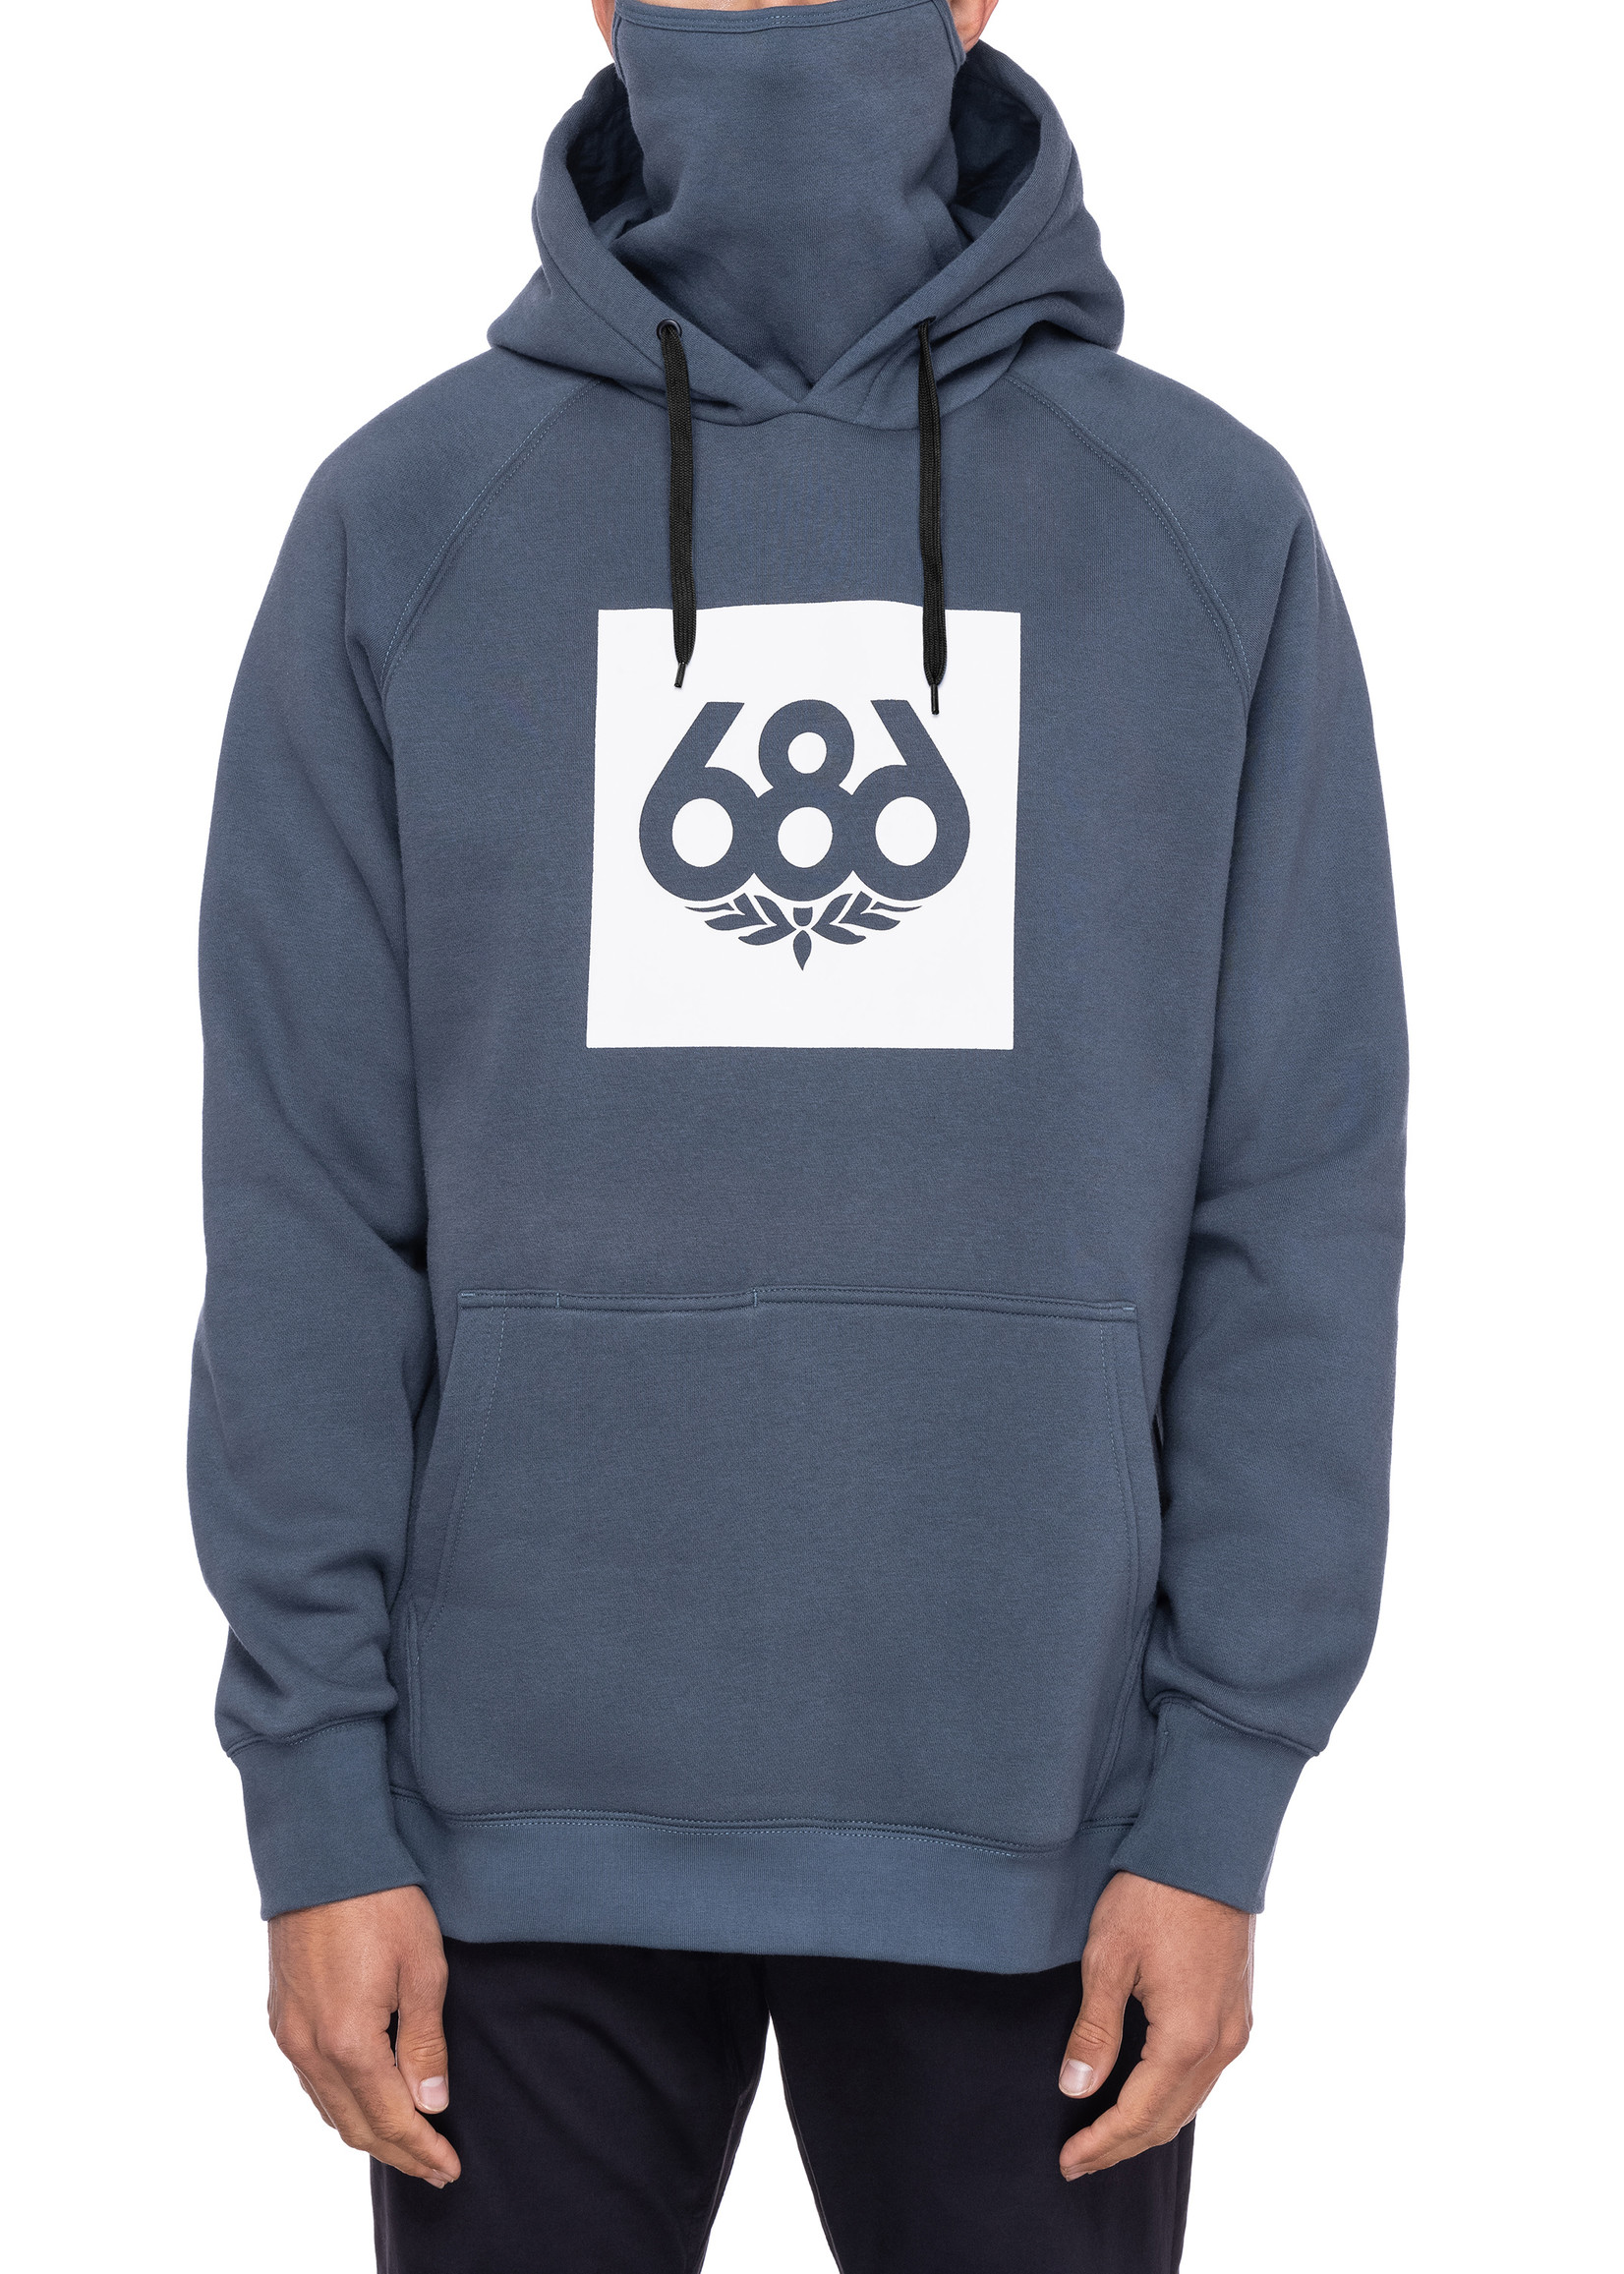 686 686 Knockout Pullover Hoody